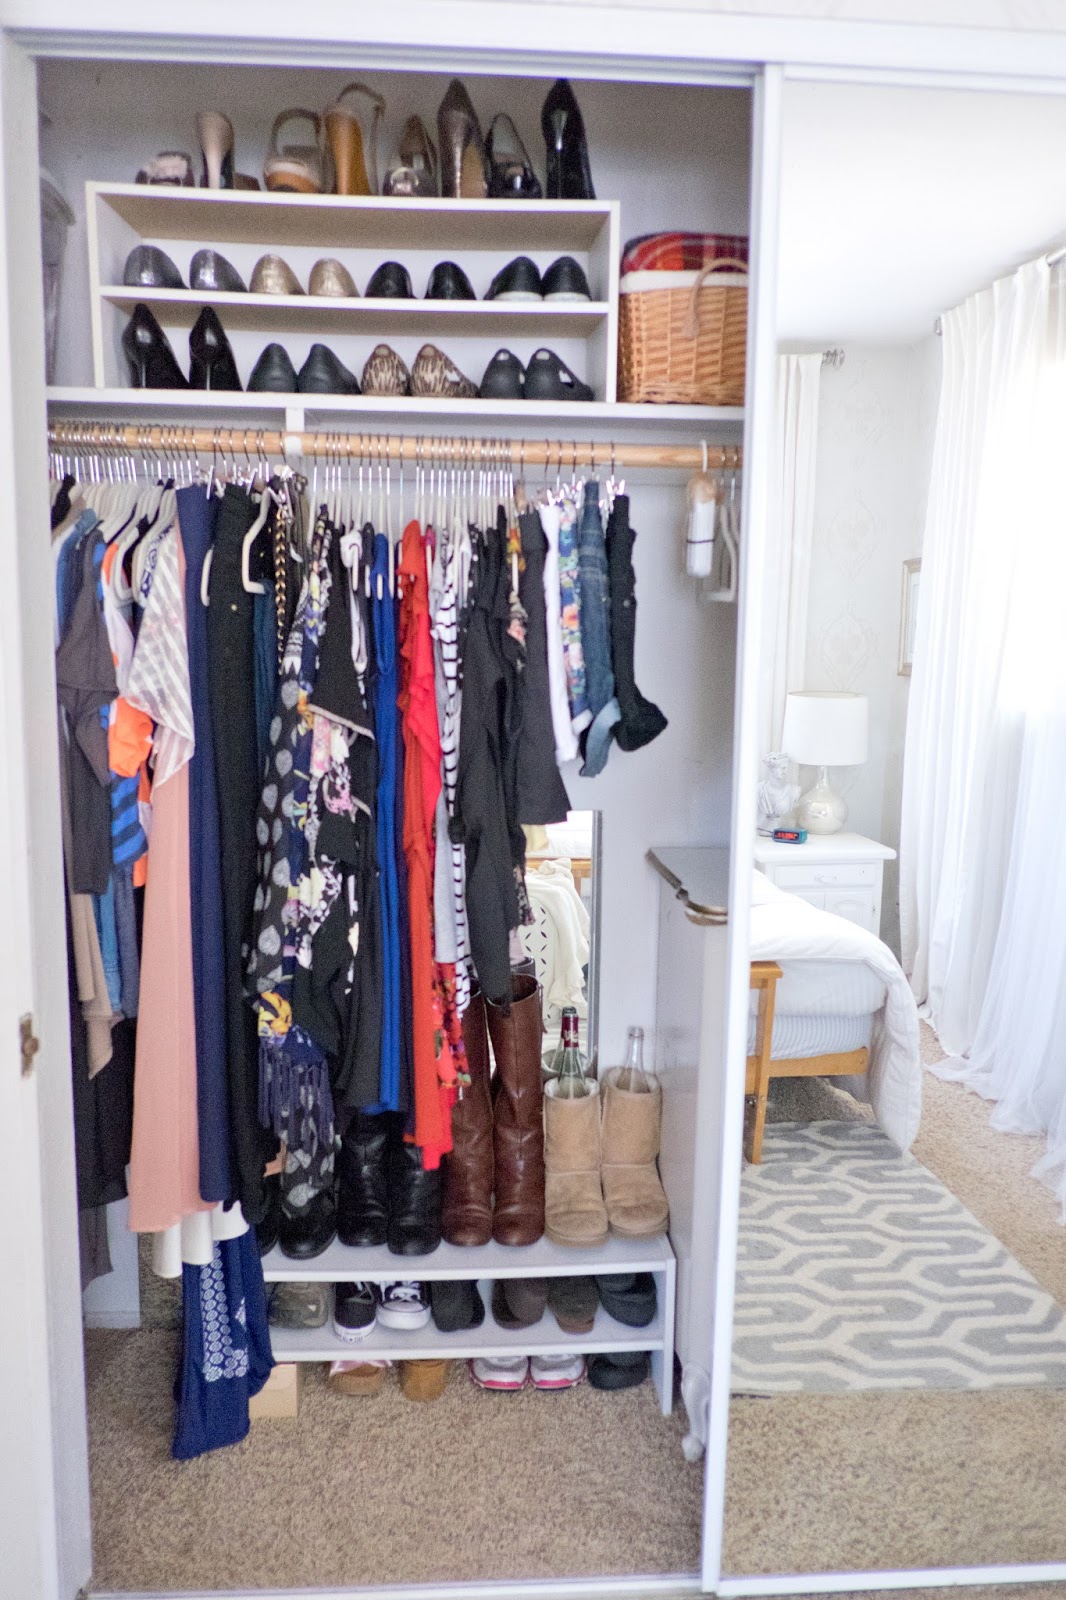 Domestic Fashionista: The Life Changing Magic of Tidying Up: The Big Purge